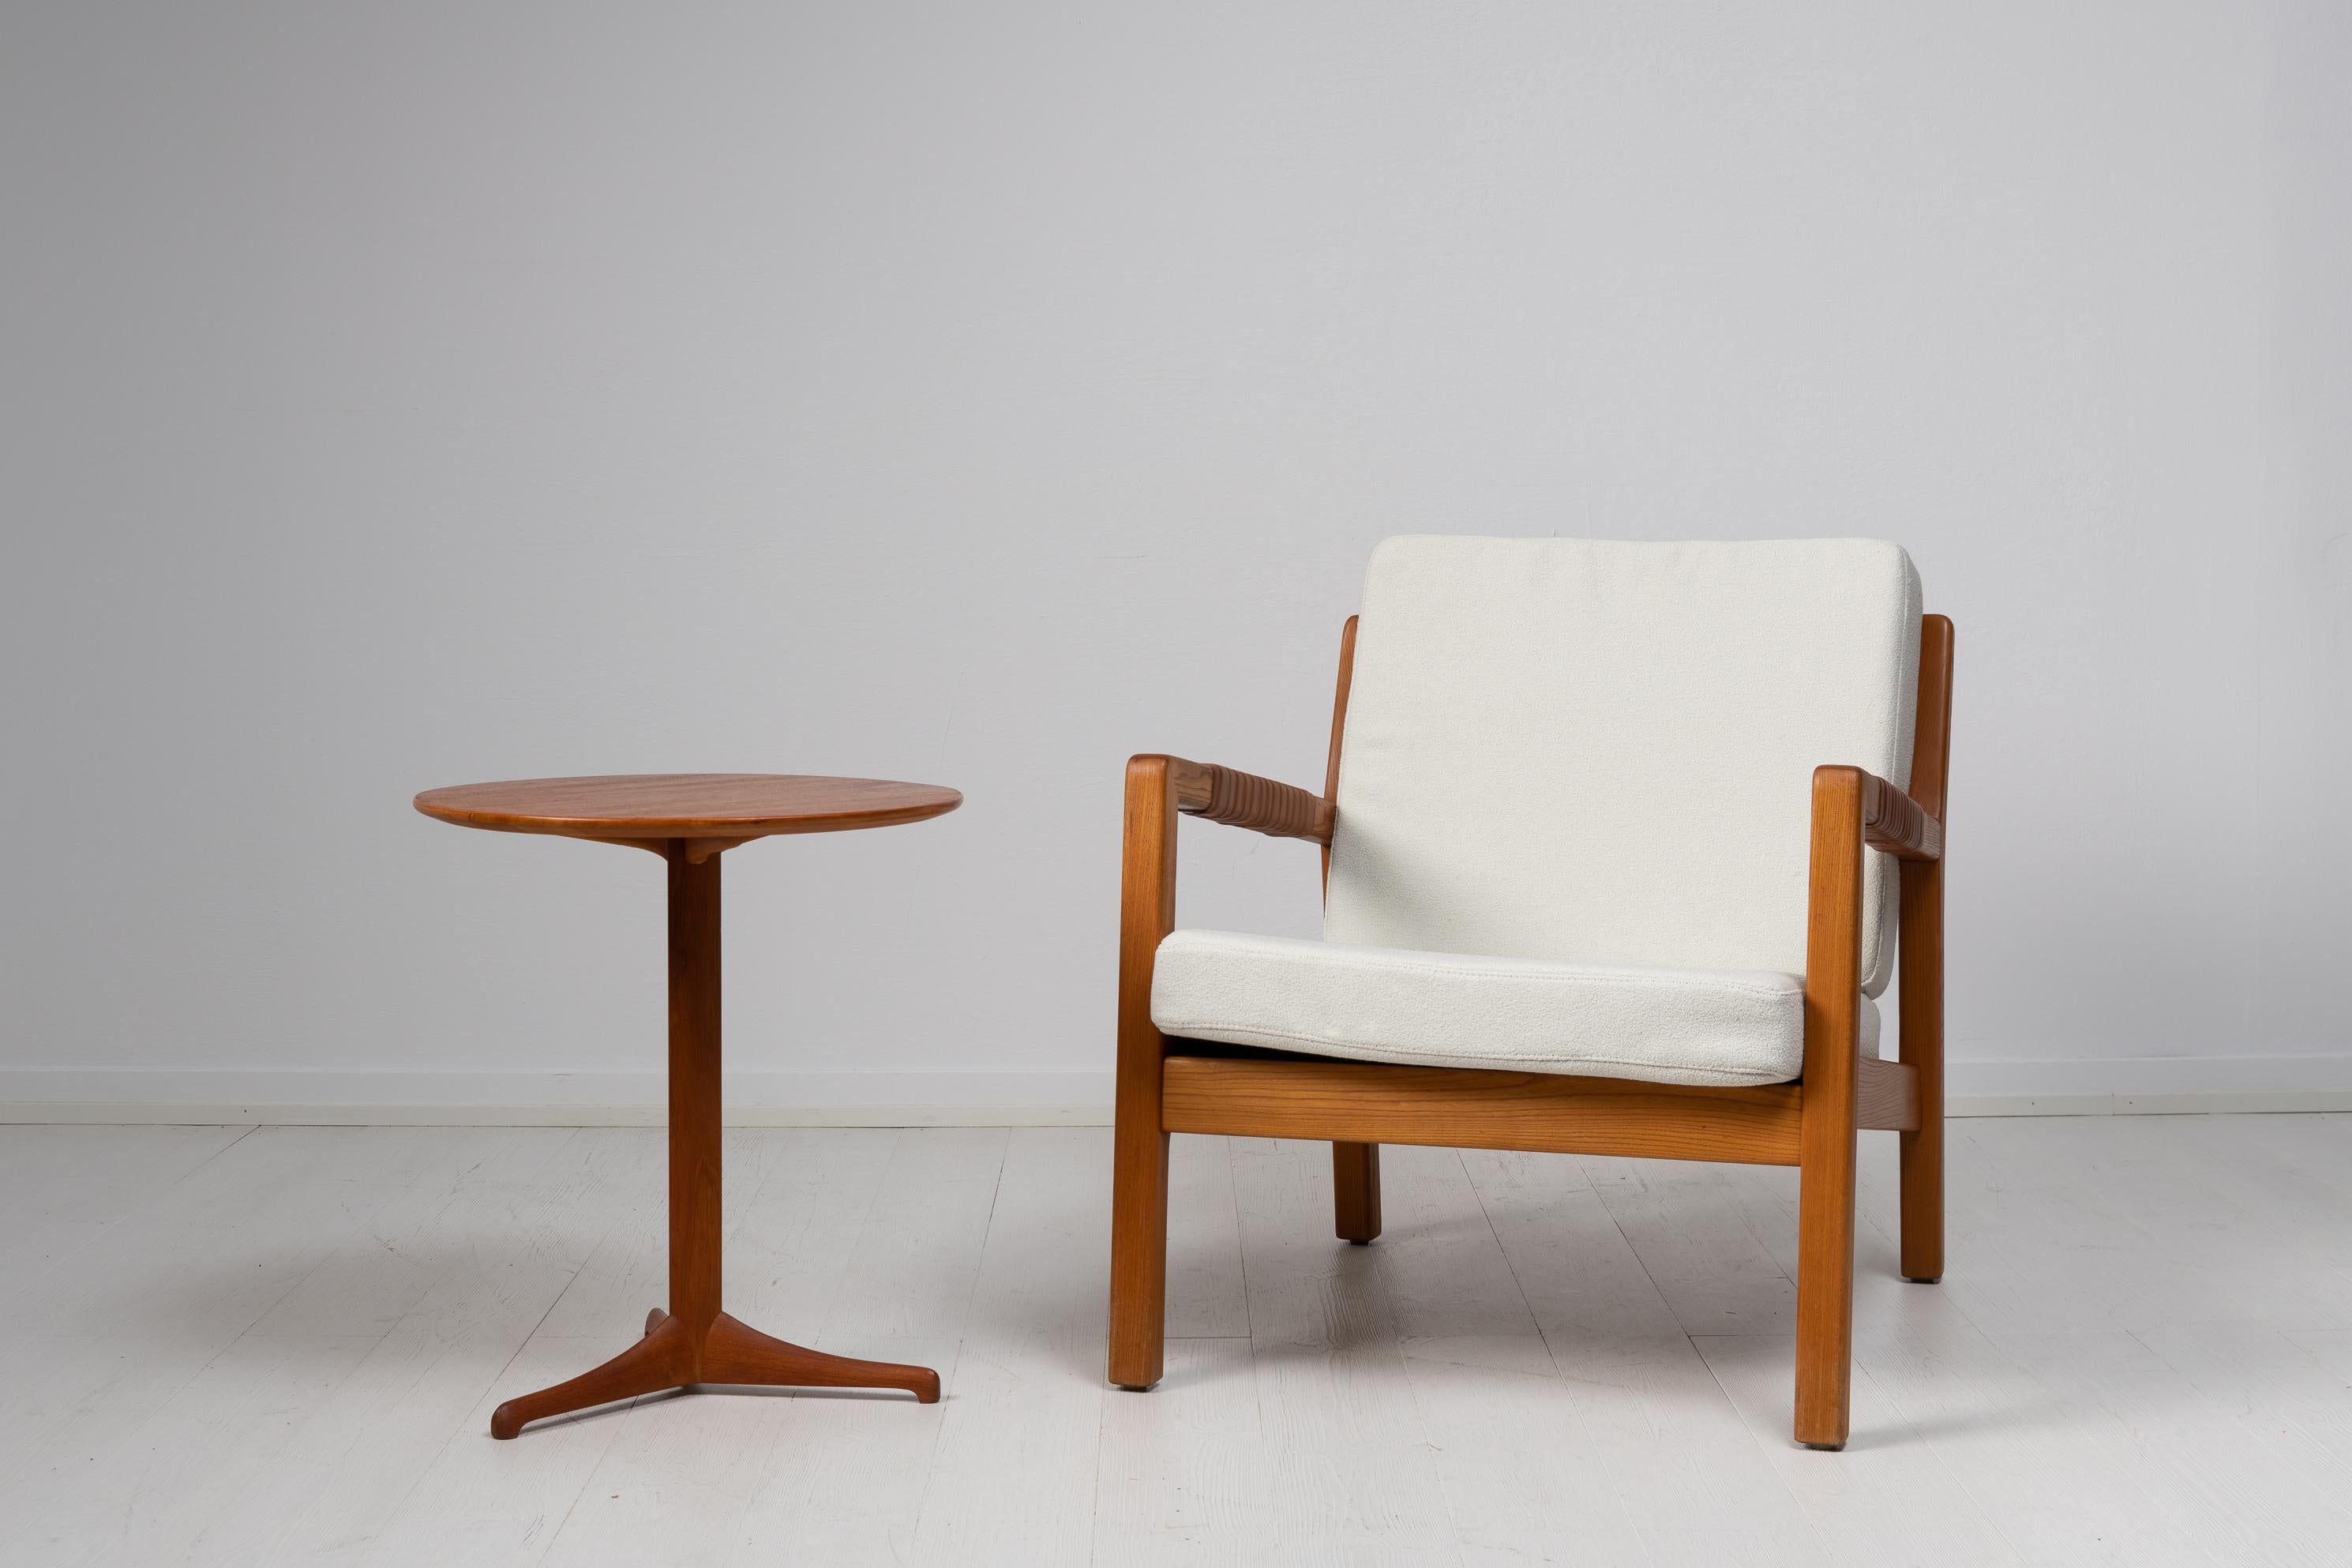 Easy chair Trienna by Carl-Gustaf Hjort af Ornäs. The model is called Trienna and is made by Hiort Tuote, Puunveisto Oy Träsnideri AB during the mid 20th century. The chair has a frame in oak with braided leather bands in the back and around the